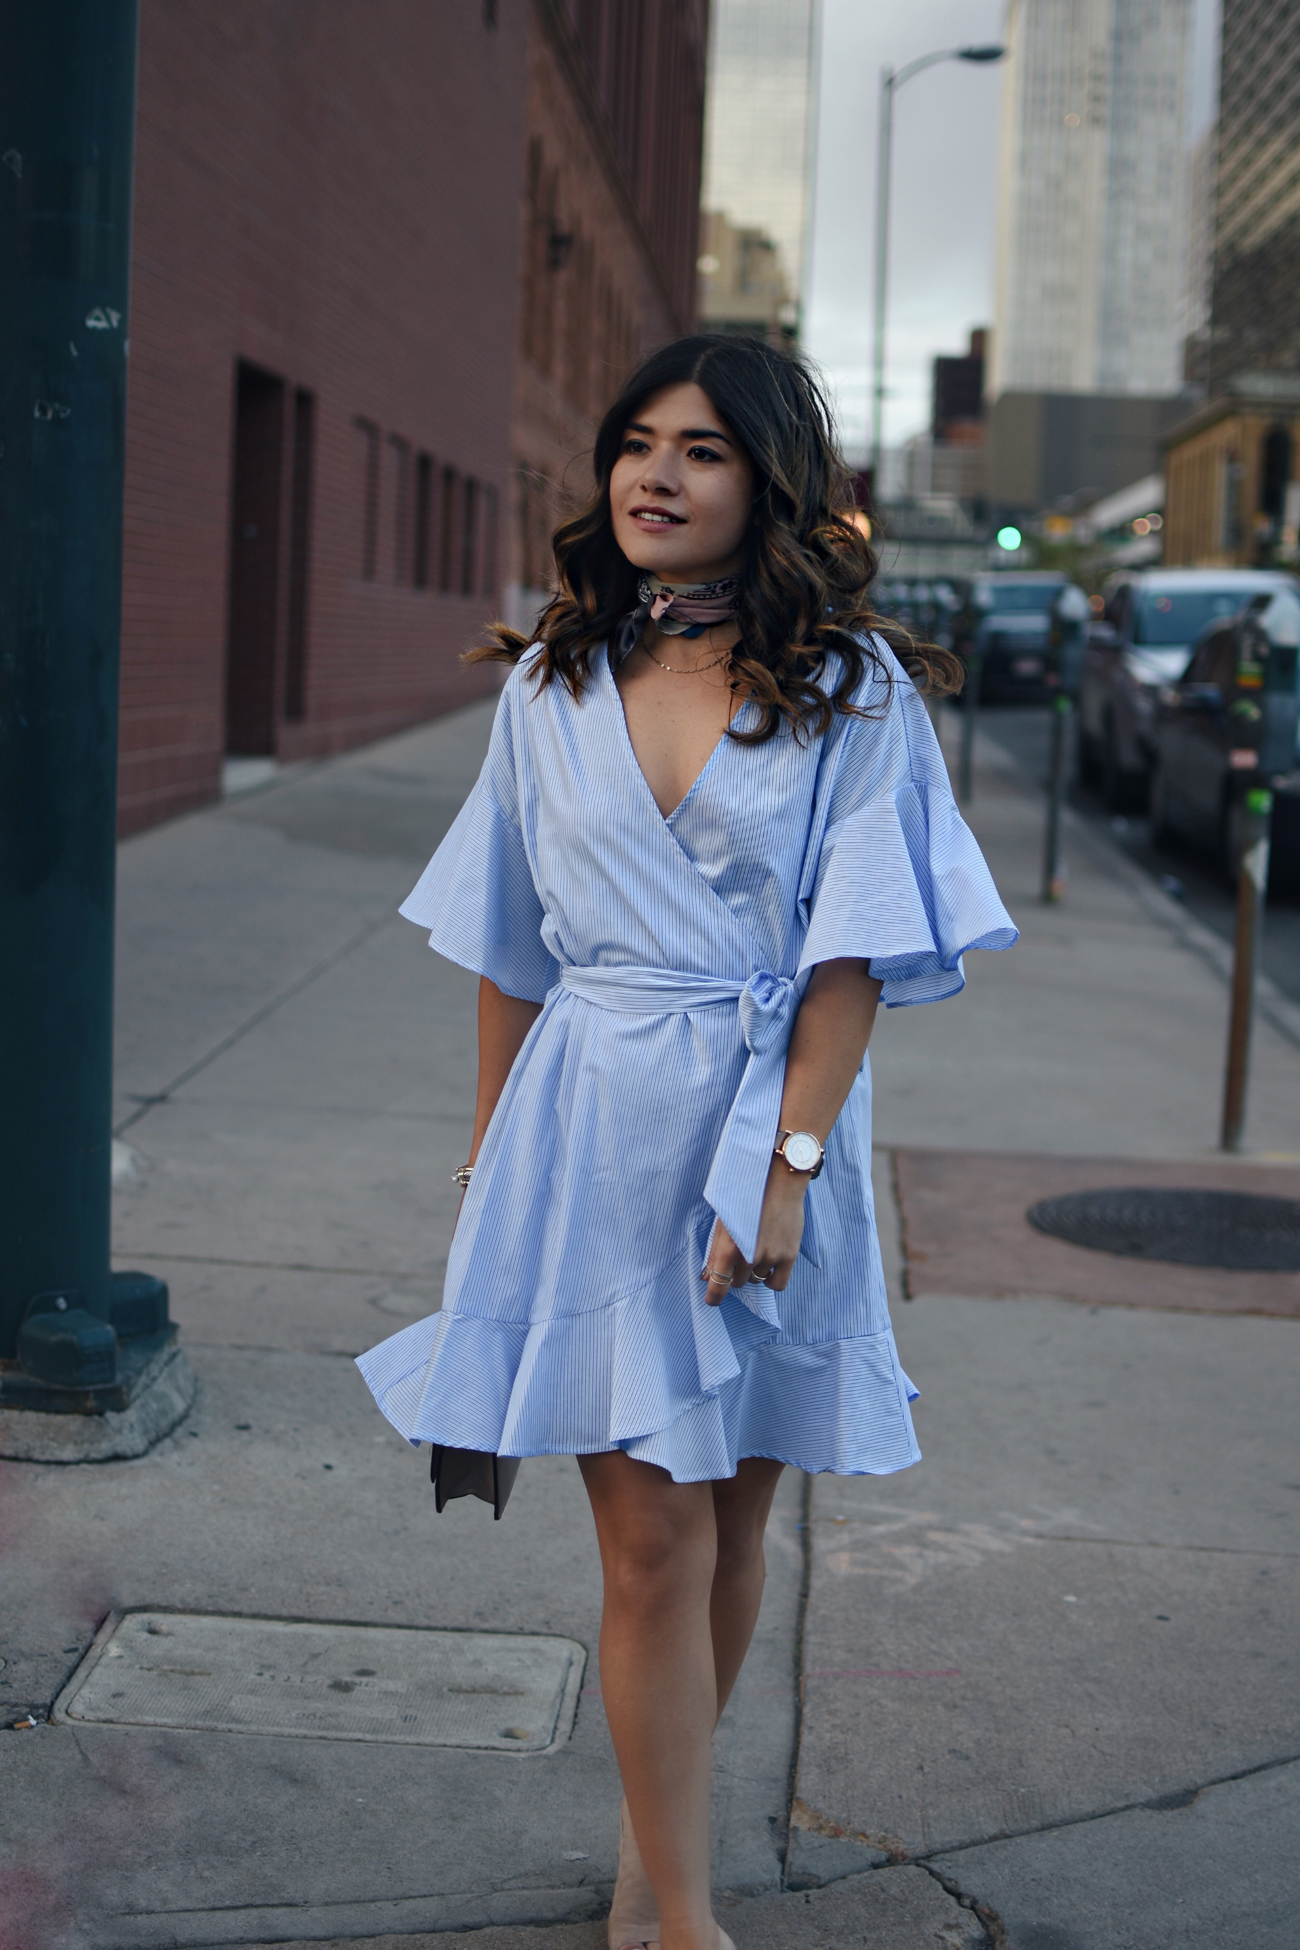 HOW TO STYLE DRESSES THIS SPRING, CHIC TALK